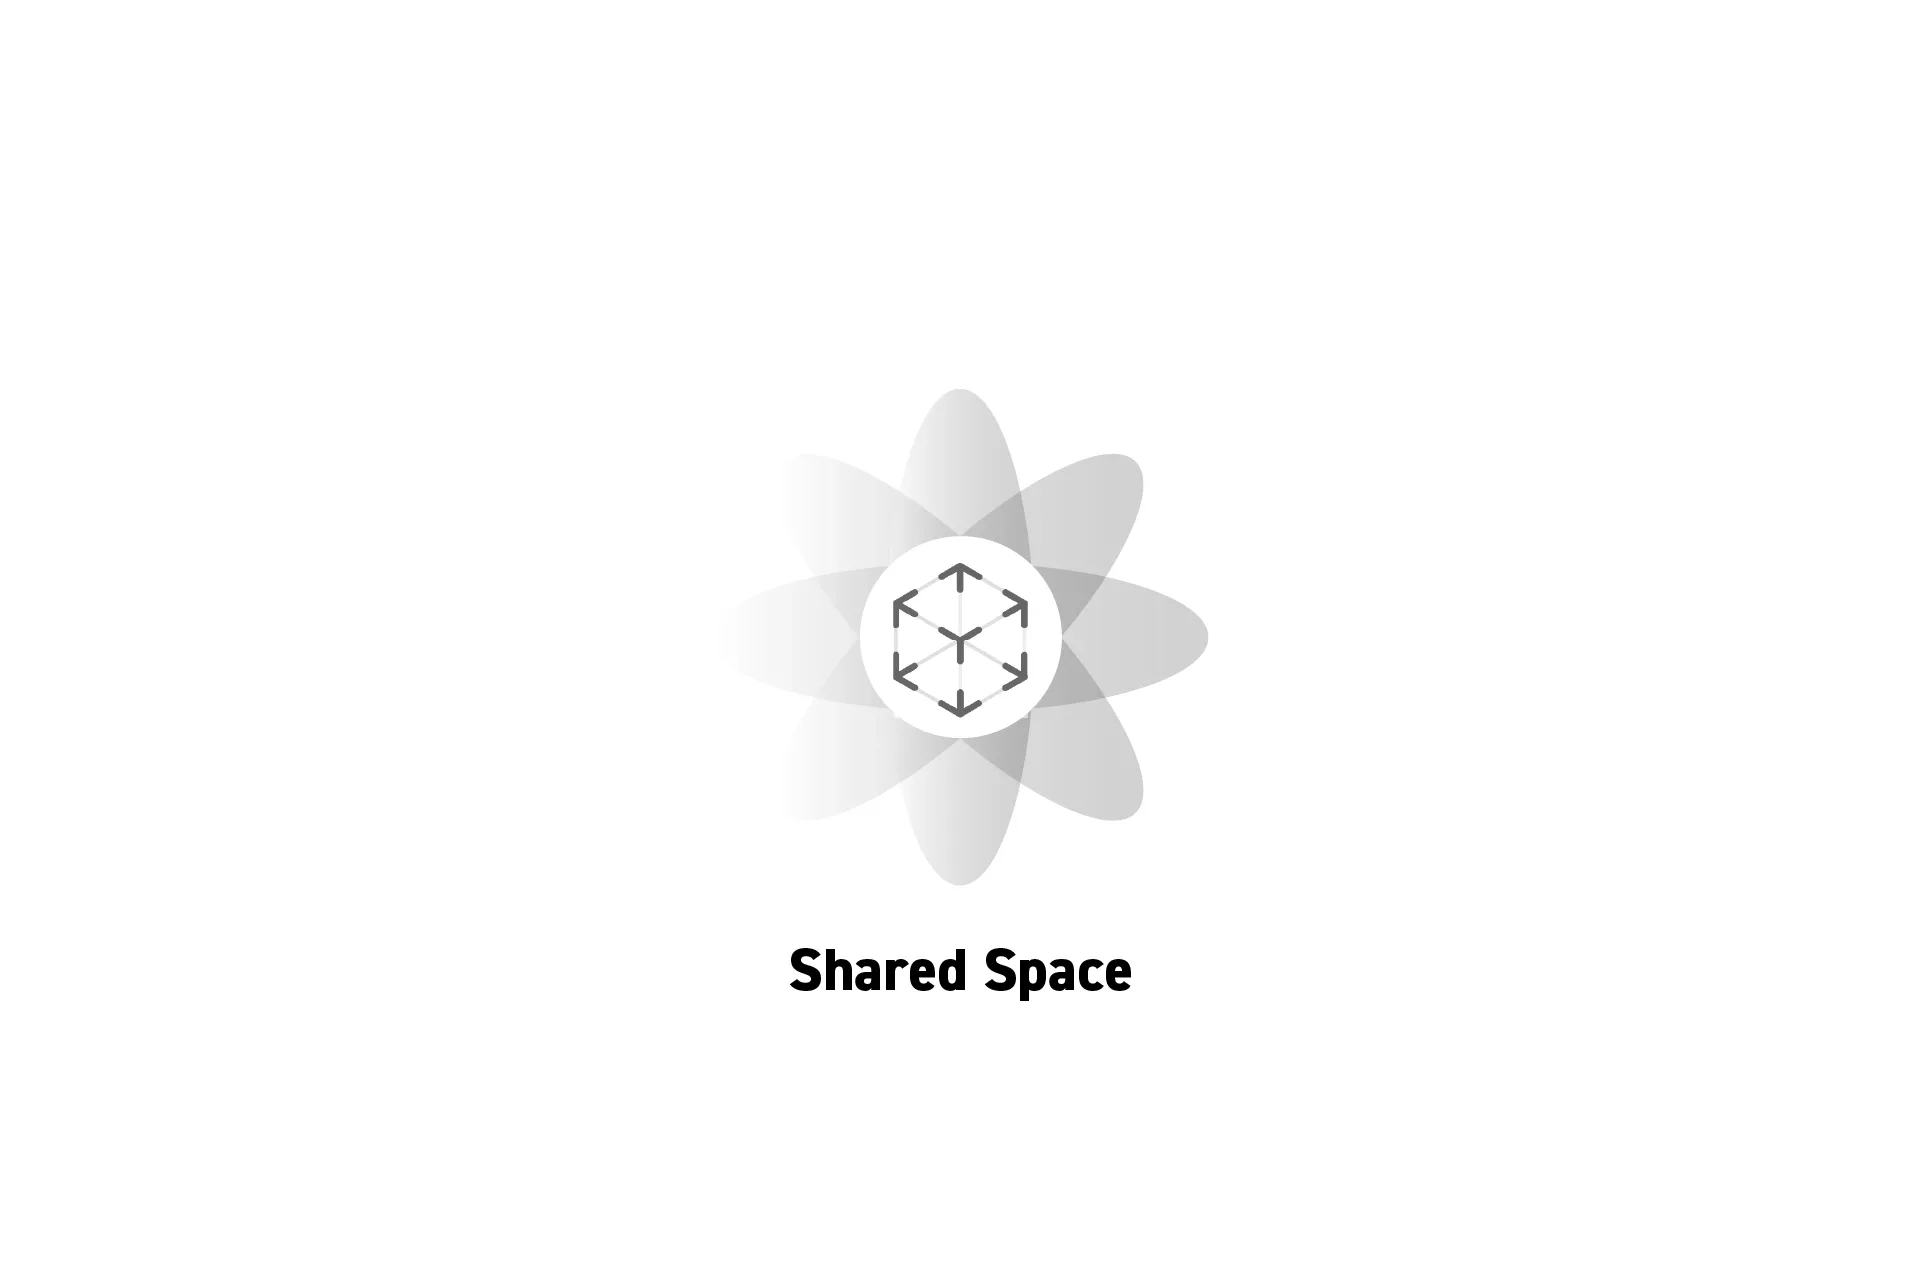 A flower that represents spatial computing with the text "Shared Space" beneath it.